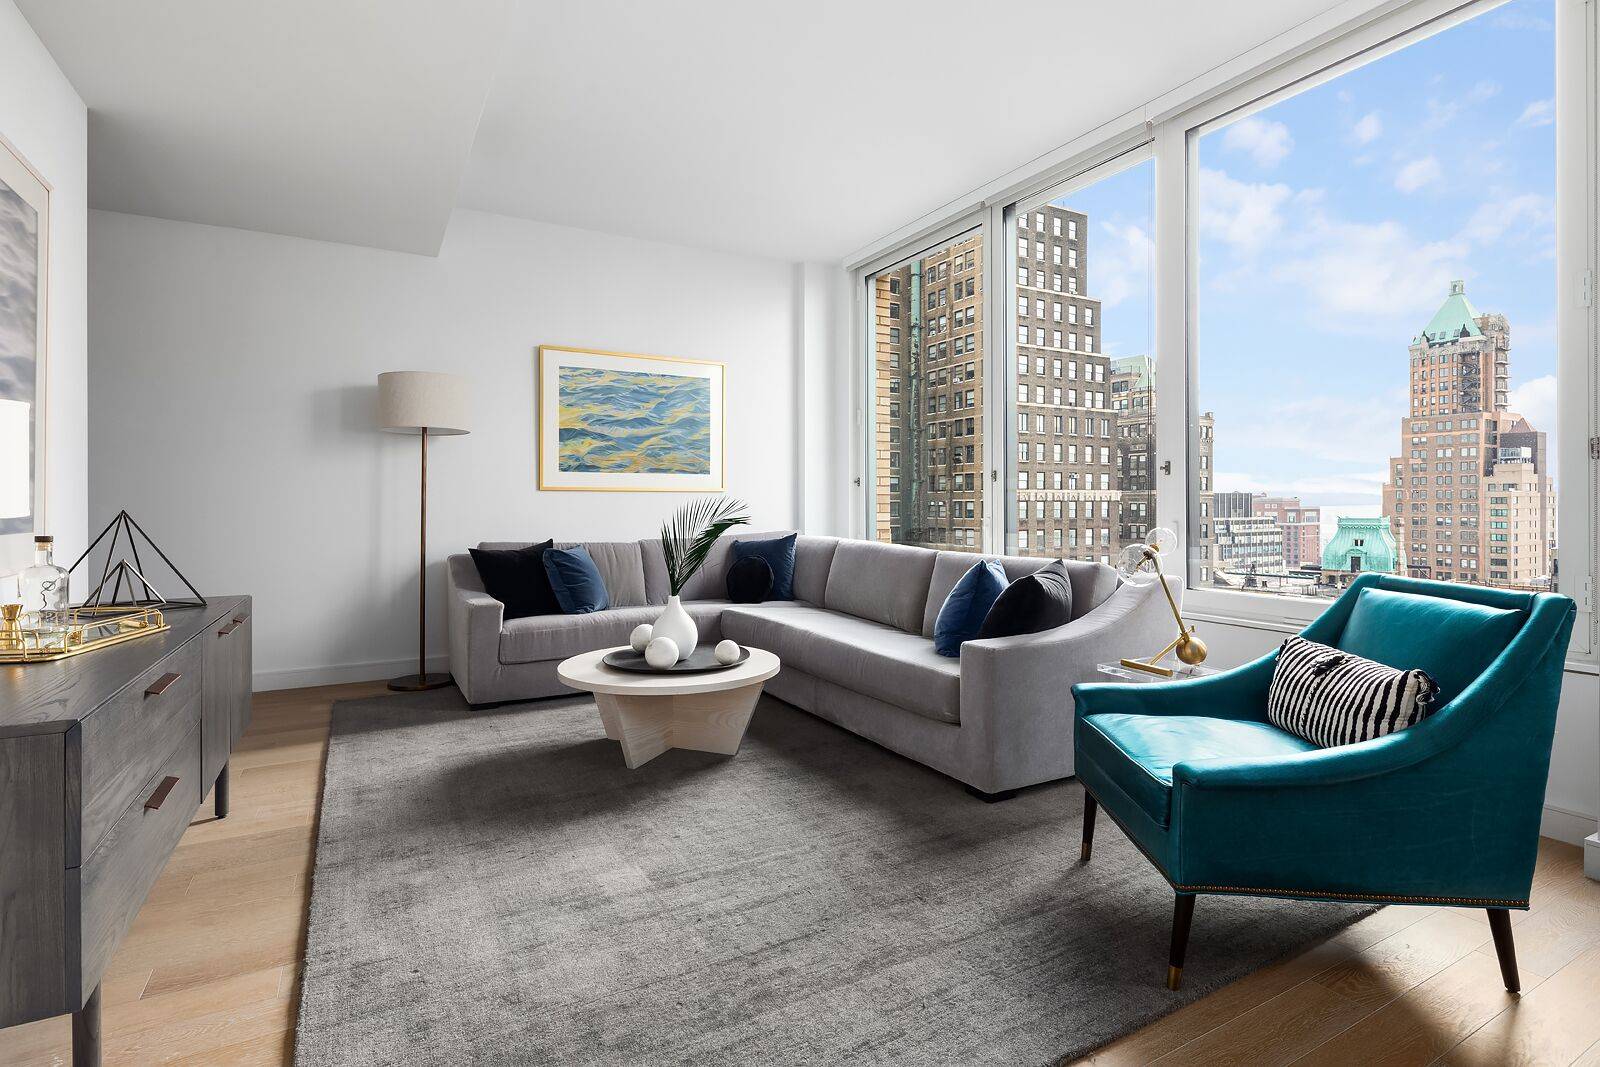 Brooklyn Heights *Three Bedroom-Two Bath Full Floor* Private Balcony / Hi-Rise/ Luxury Amenity / 24-Hour Concierge / Outdoor Rooftop / Terrace / BBQ Space / Lounge Room / Fitness Center/ Yoga Room / Freedom Tower Views / Minutes to Manhattan